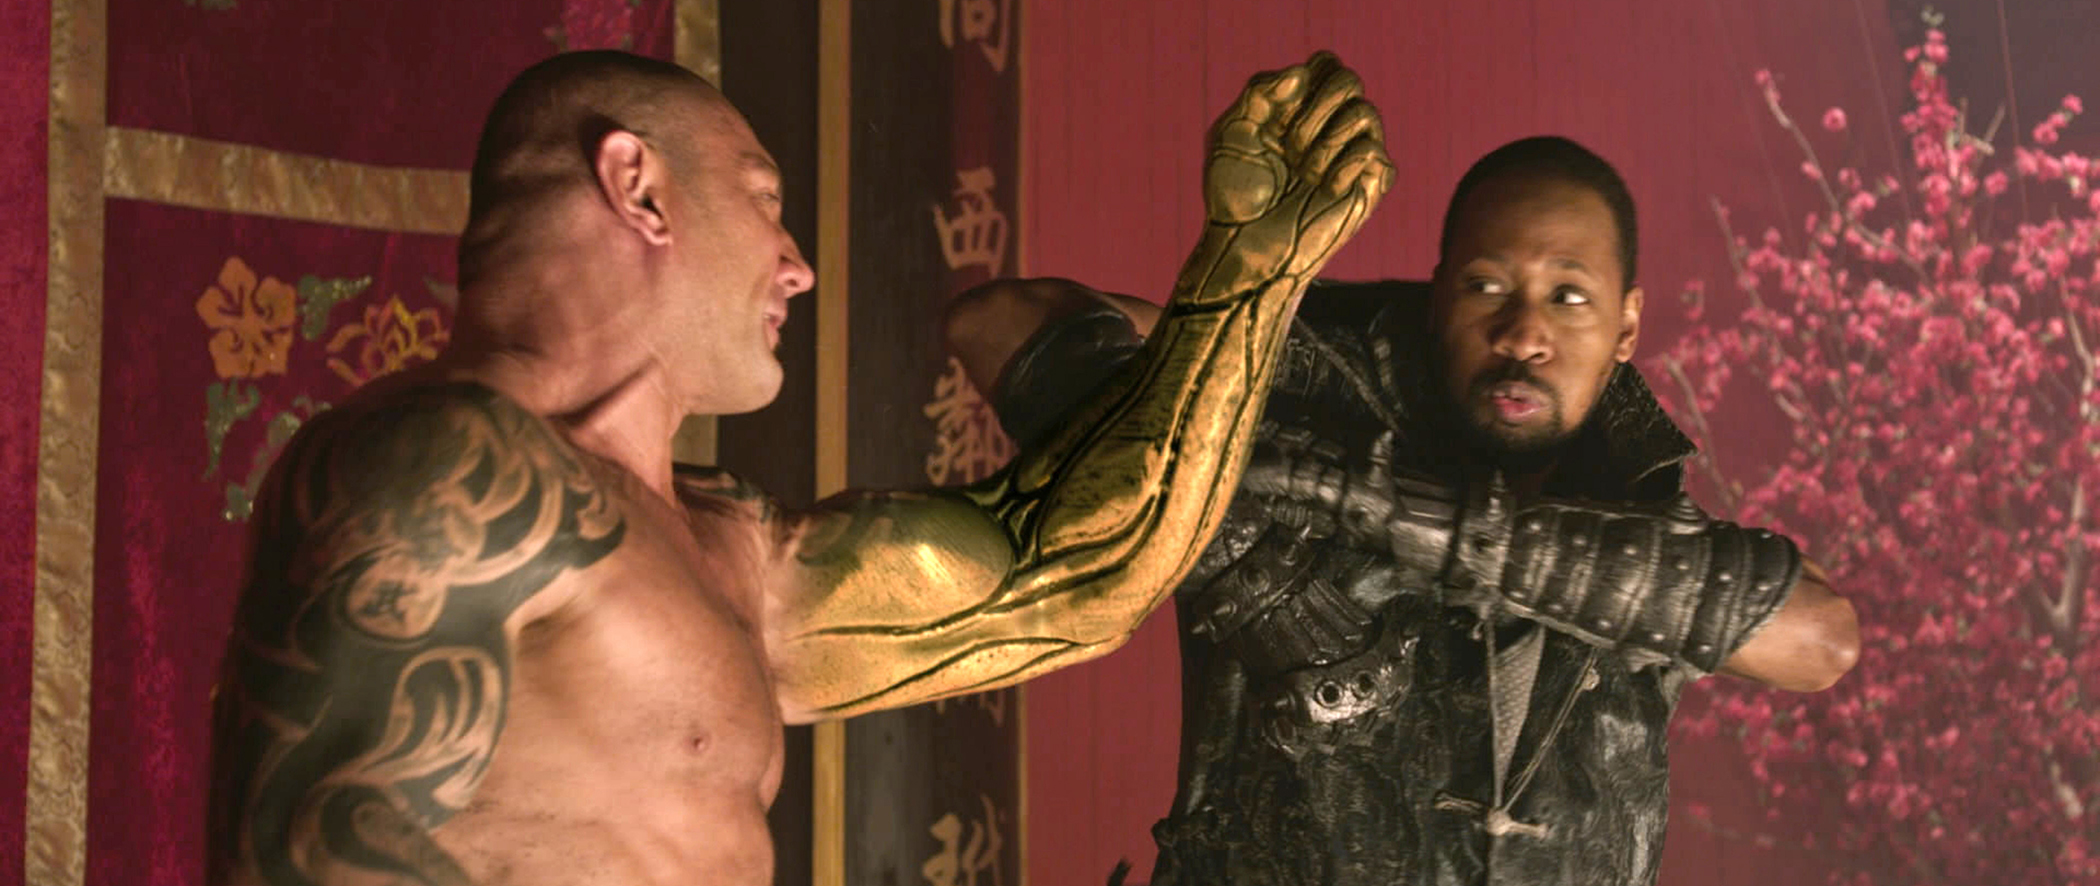 The Man With The Iron Fists 2 Backgrounds, Compatible - PC, Mobile, Gadgets| 2100x886 px